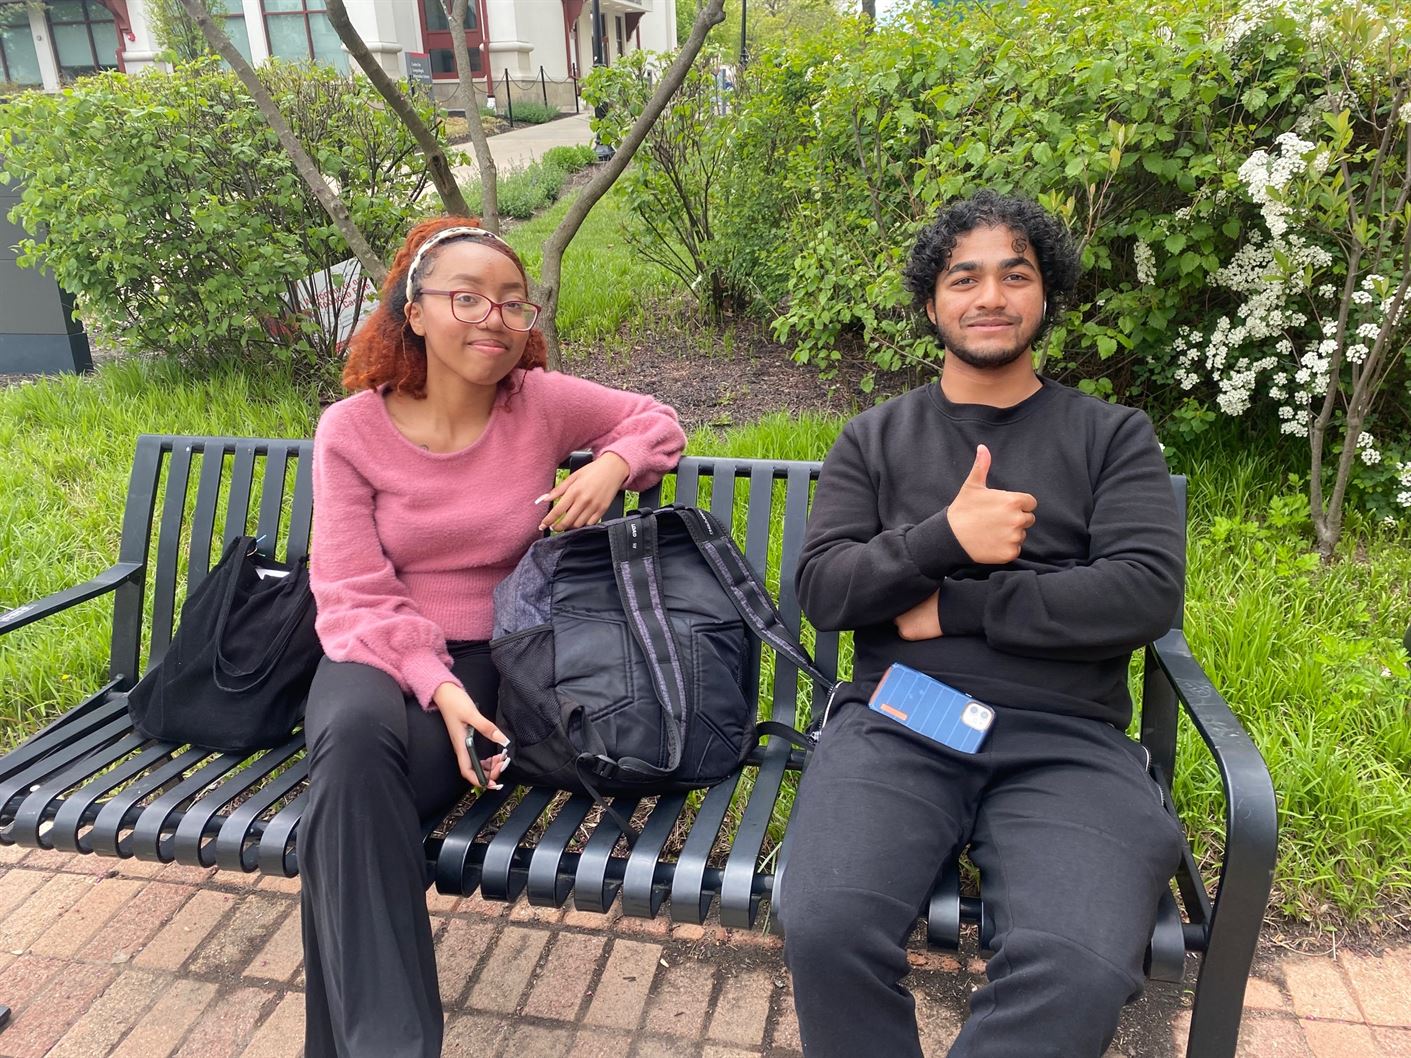 Amira Holmes and Saher Chaudhry listen to music during finals to cope with stress.
Kamil Santana | The Montclarion